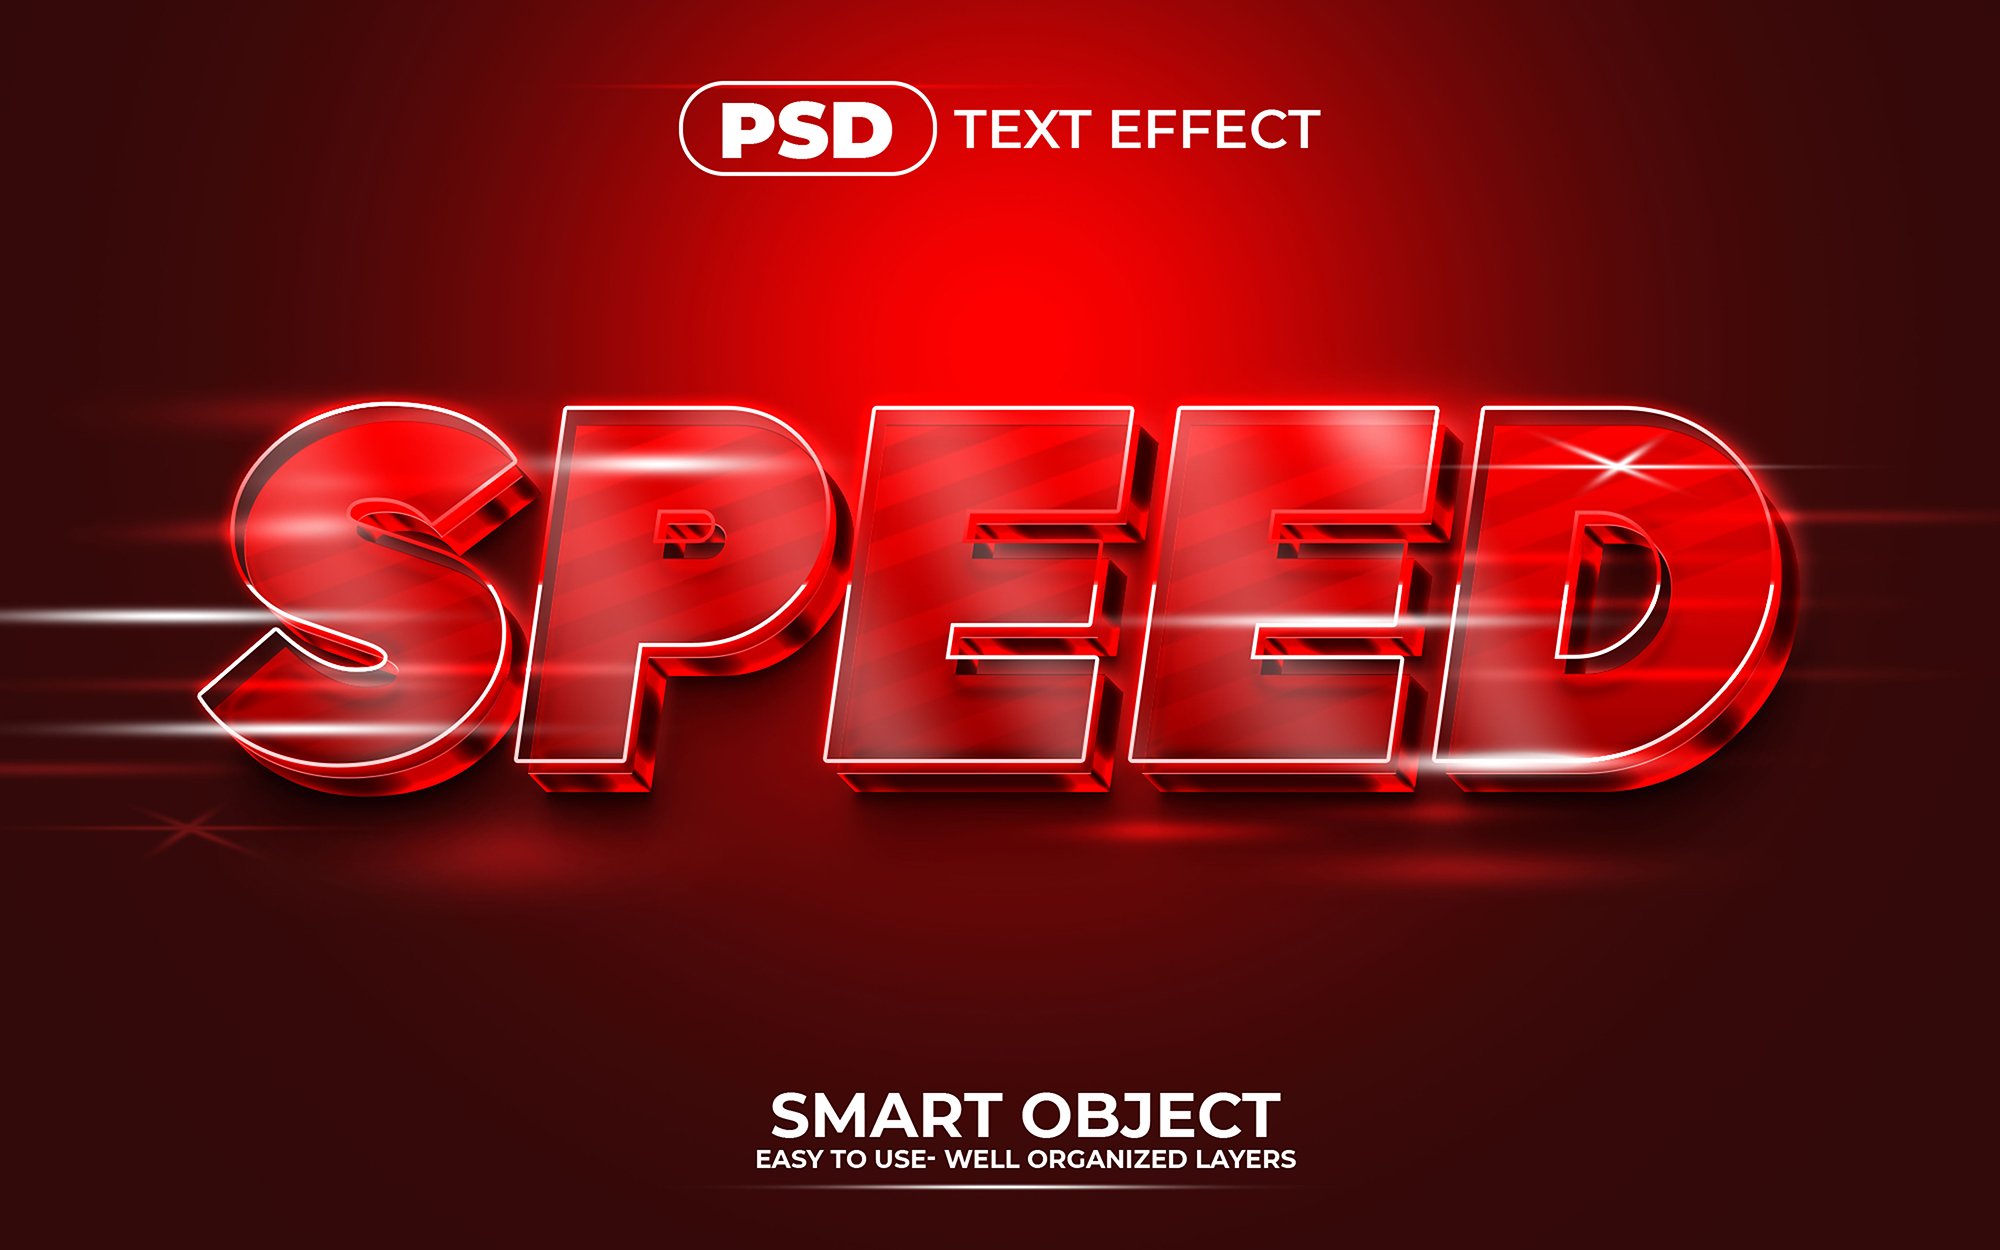 Speed 3D Editable Text Effect stylecover image.